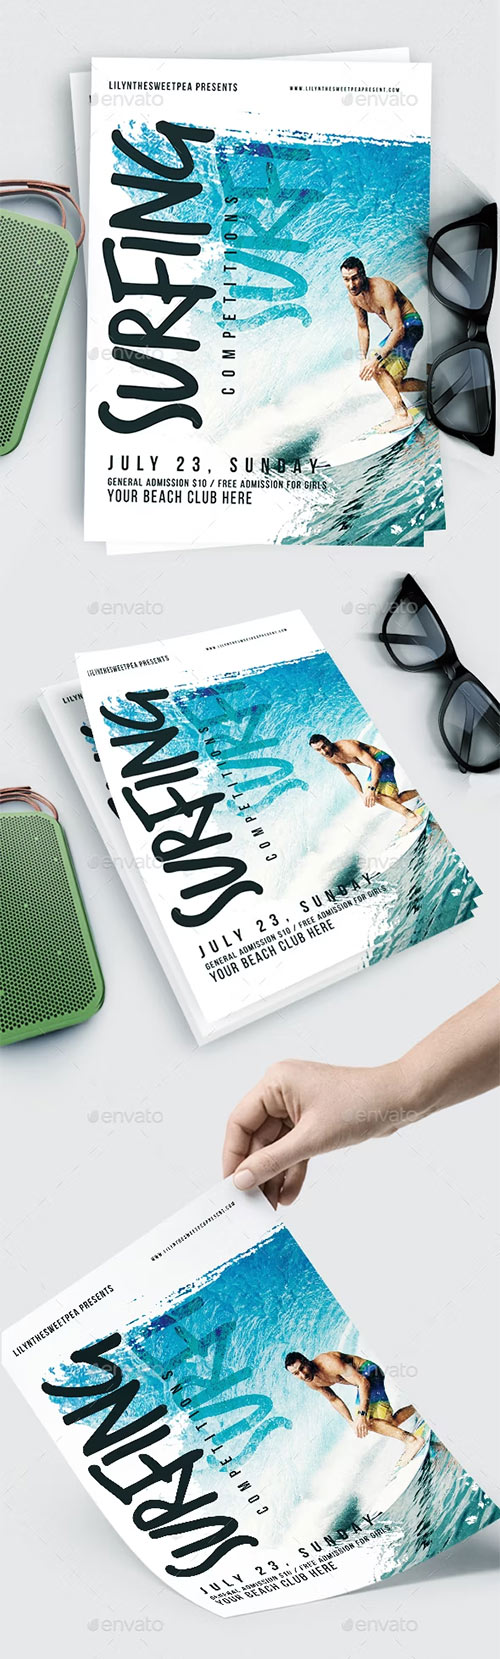 Surfing Competition Flyer & Poster 20181089